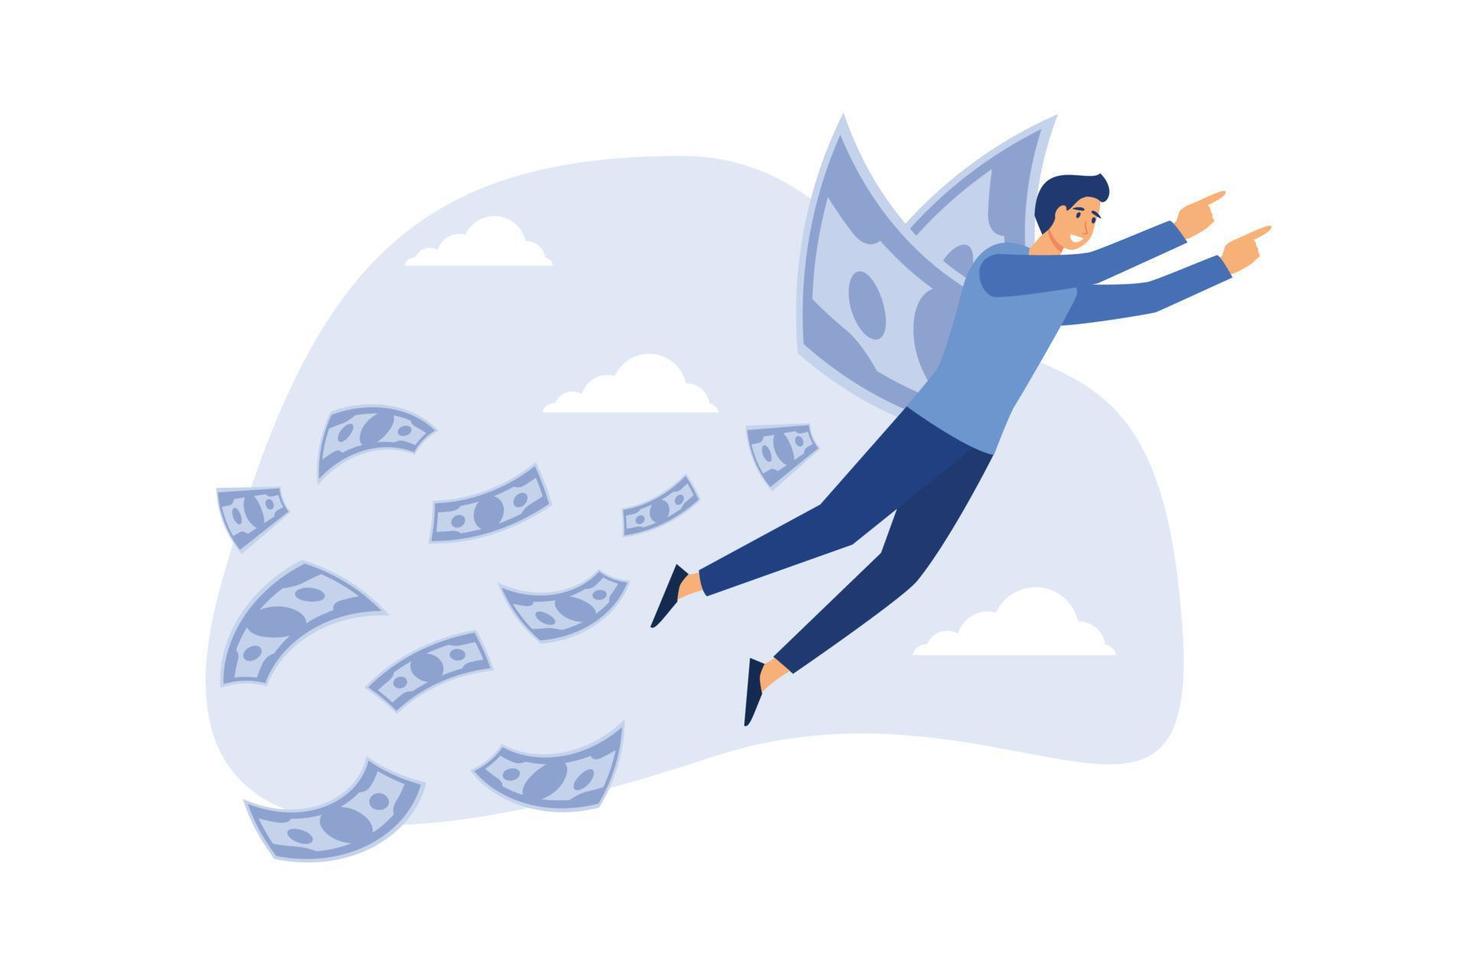 Financial success, make profit from investment opportunity, money management and wealth preservation concept, rich businessman flying with money banknote wings using telescope to see future vision. vector